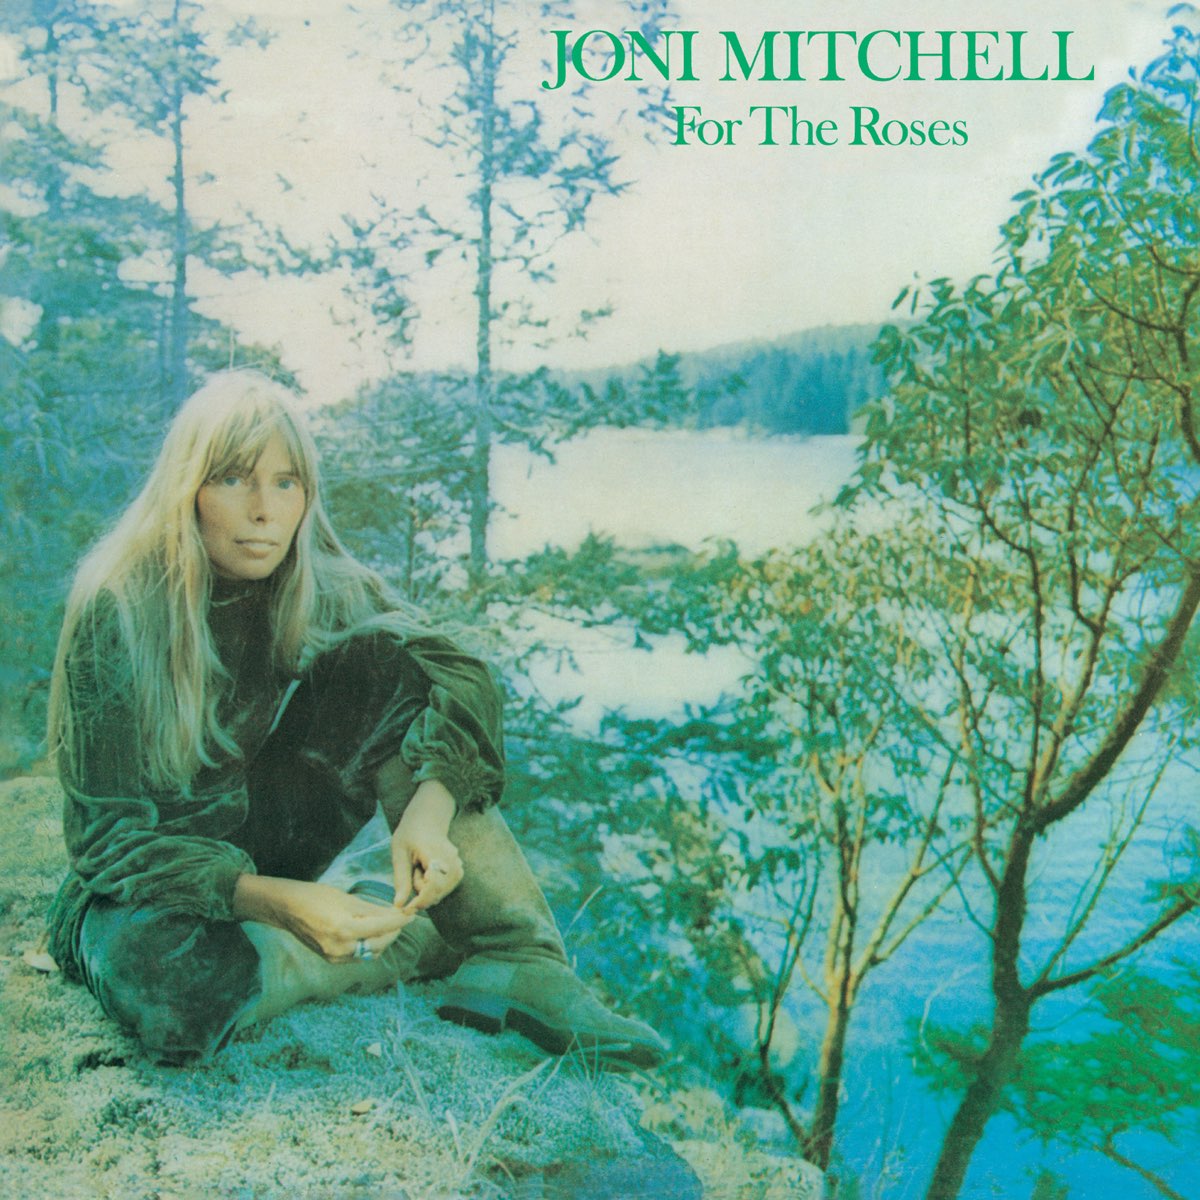 ‎For the Roses - Album by Joni Mitchell - Apple Music